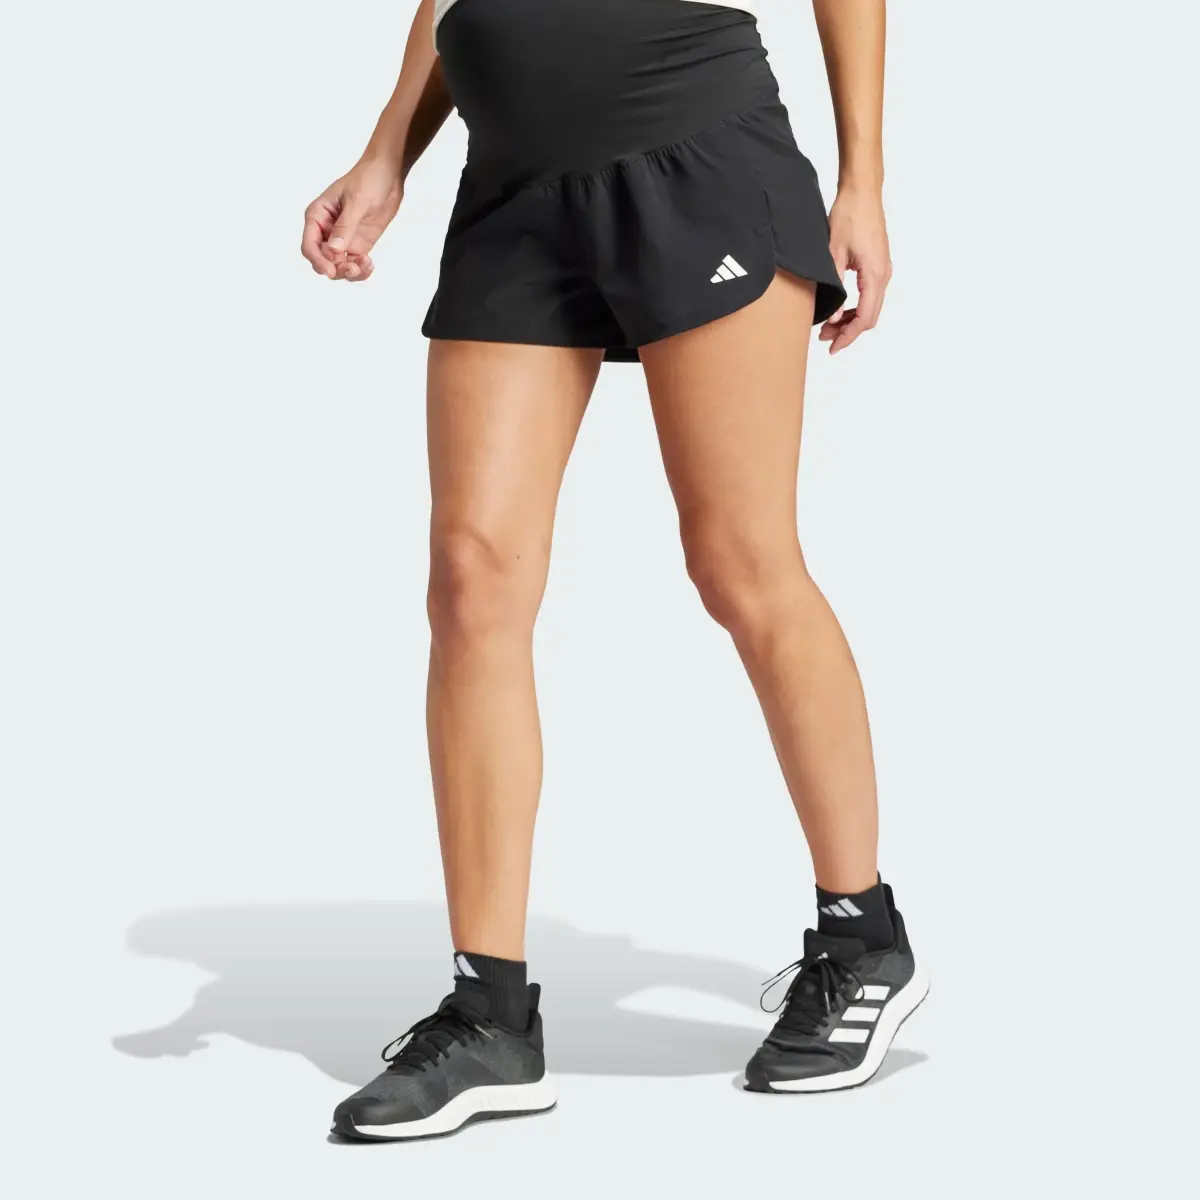 Adidas Pacer Woven Stretch Training Maternity Shorts. 1